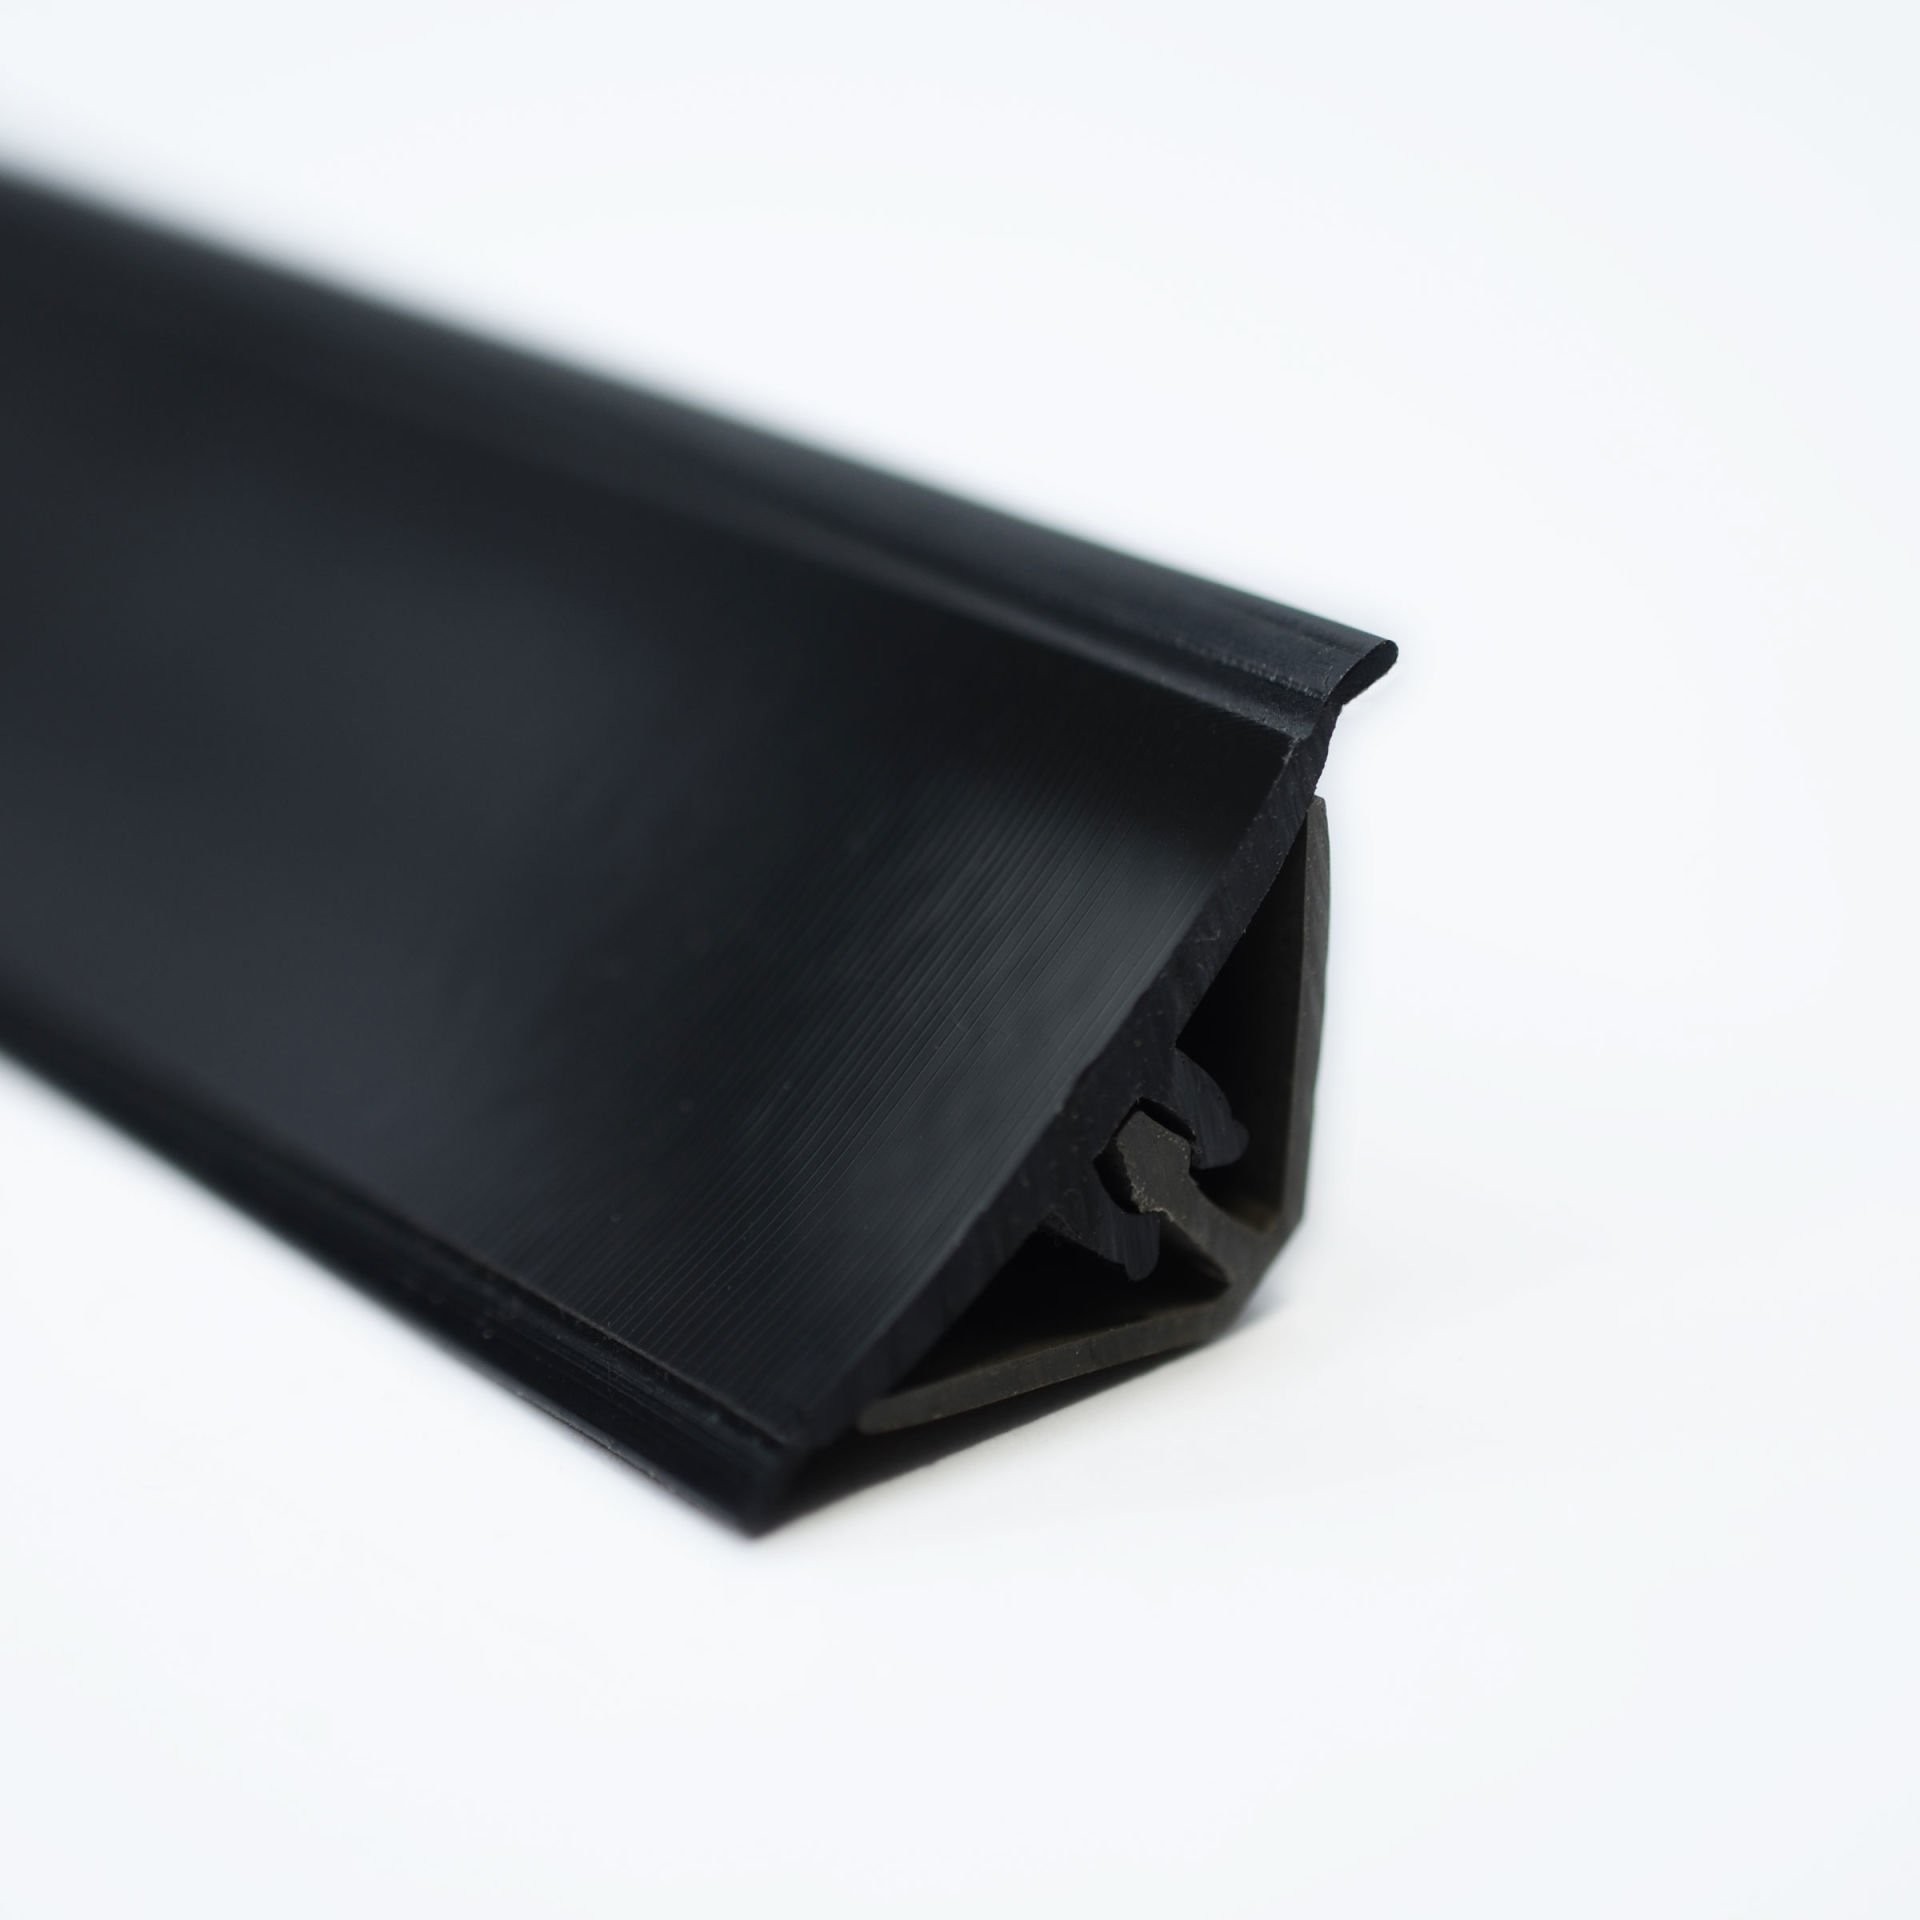 The PVC Baseboard Profile Inner Concave 15x15 Coated HG Black